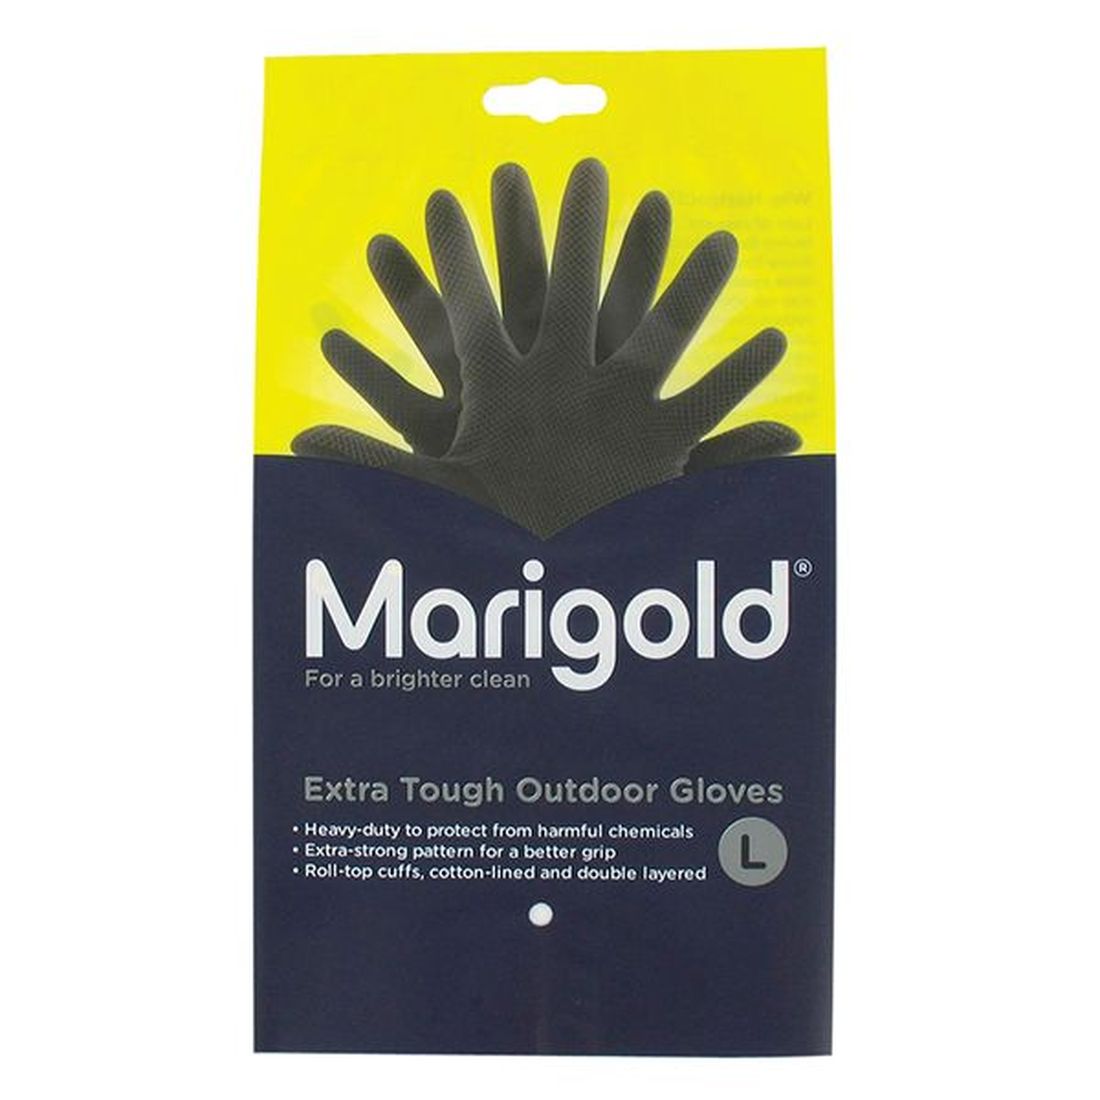 Marigold Extra Tough Outdoor Gloves - Large (6 Pairs)                                    